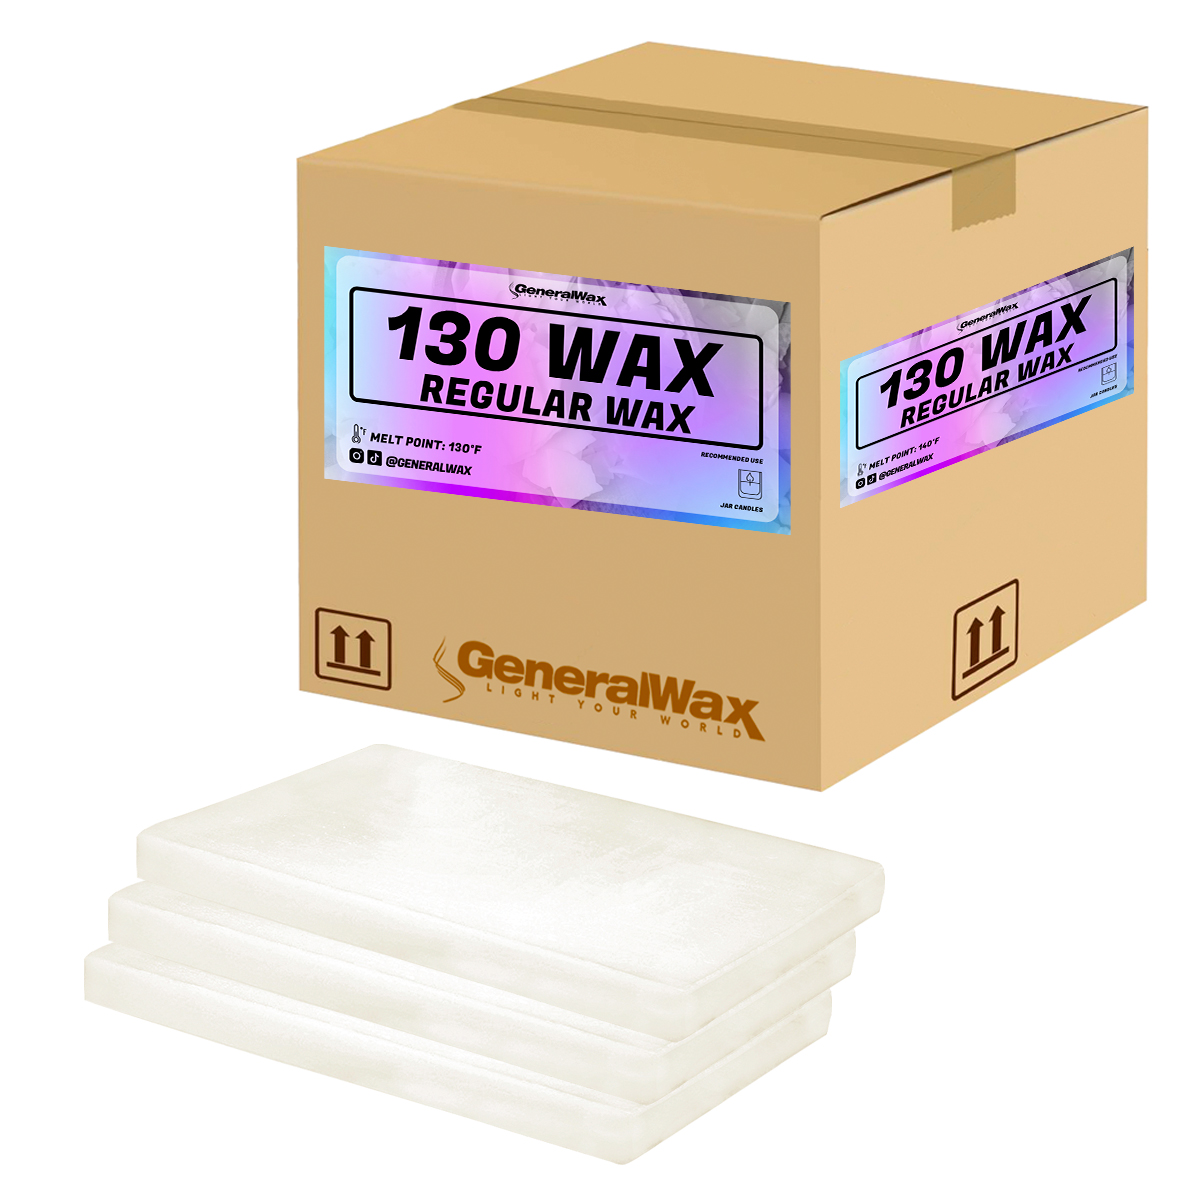 130 REGULAR WAX for Container & Votive Candles